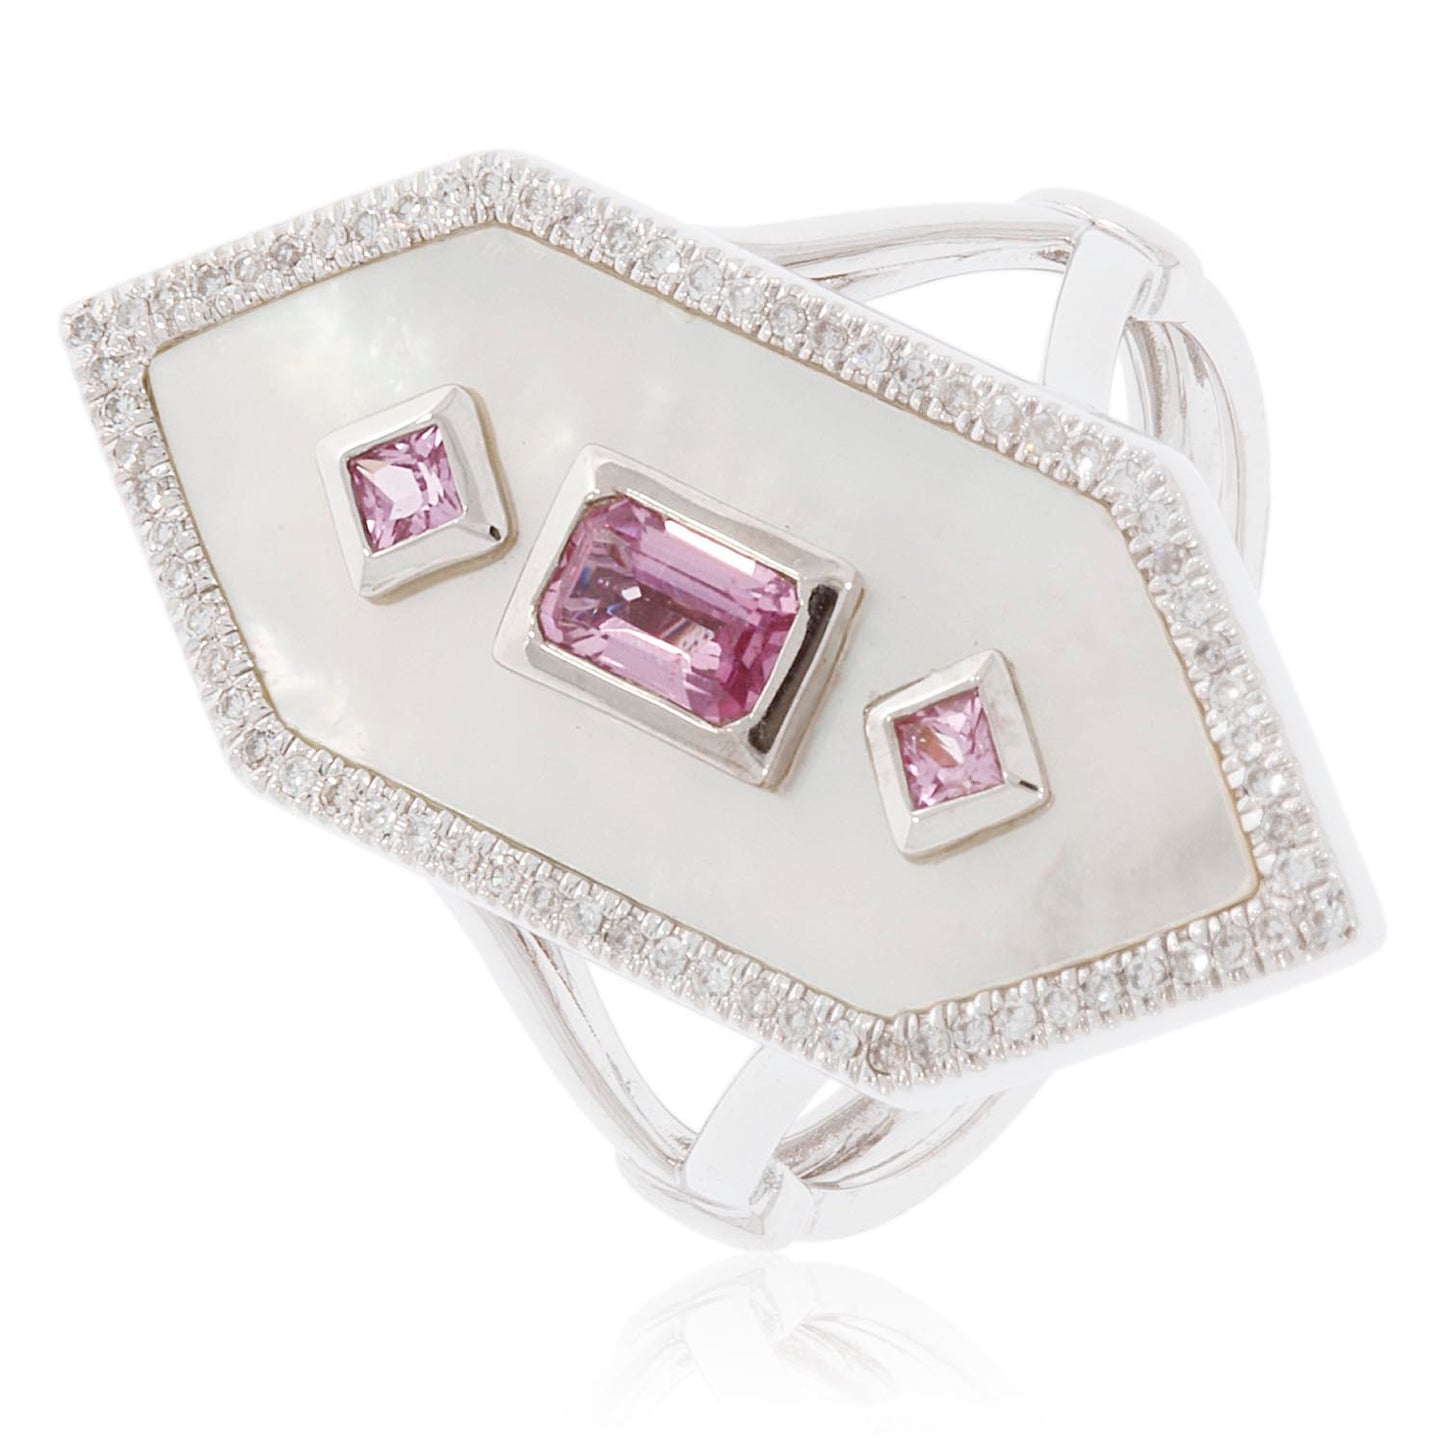 Luvente 14 Karat White Gold Hexagon Mother of Pearl, Pink Sapphire, and Diamond Ring